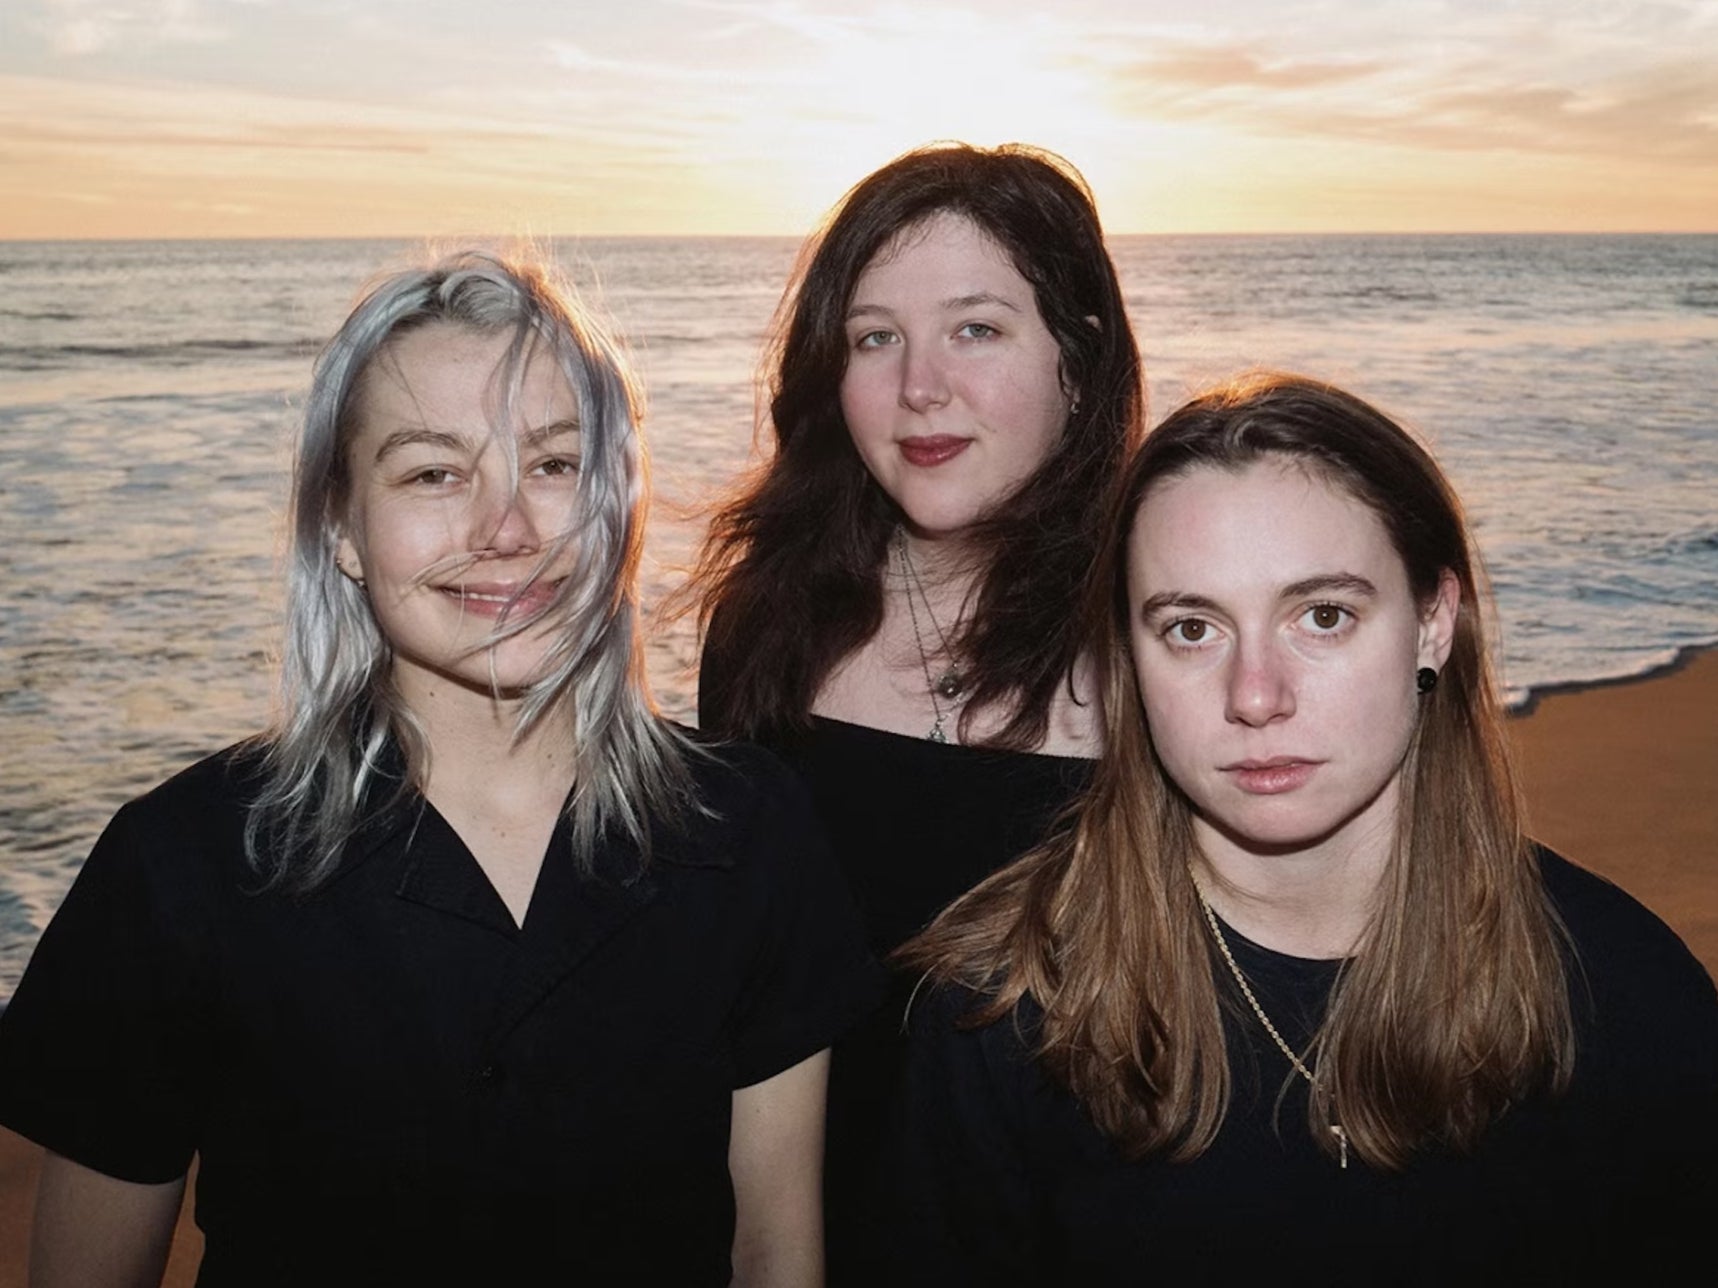 From left to right: Phoebe Bridgers, Lucy Dacus, Julien Baker